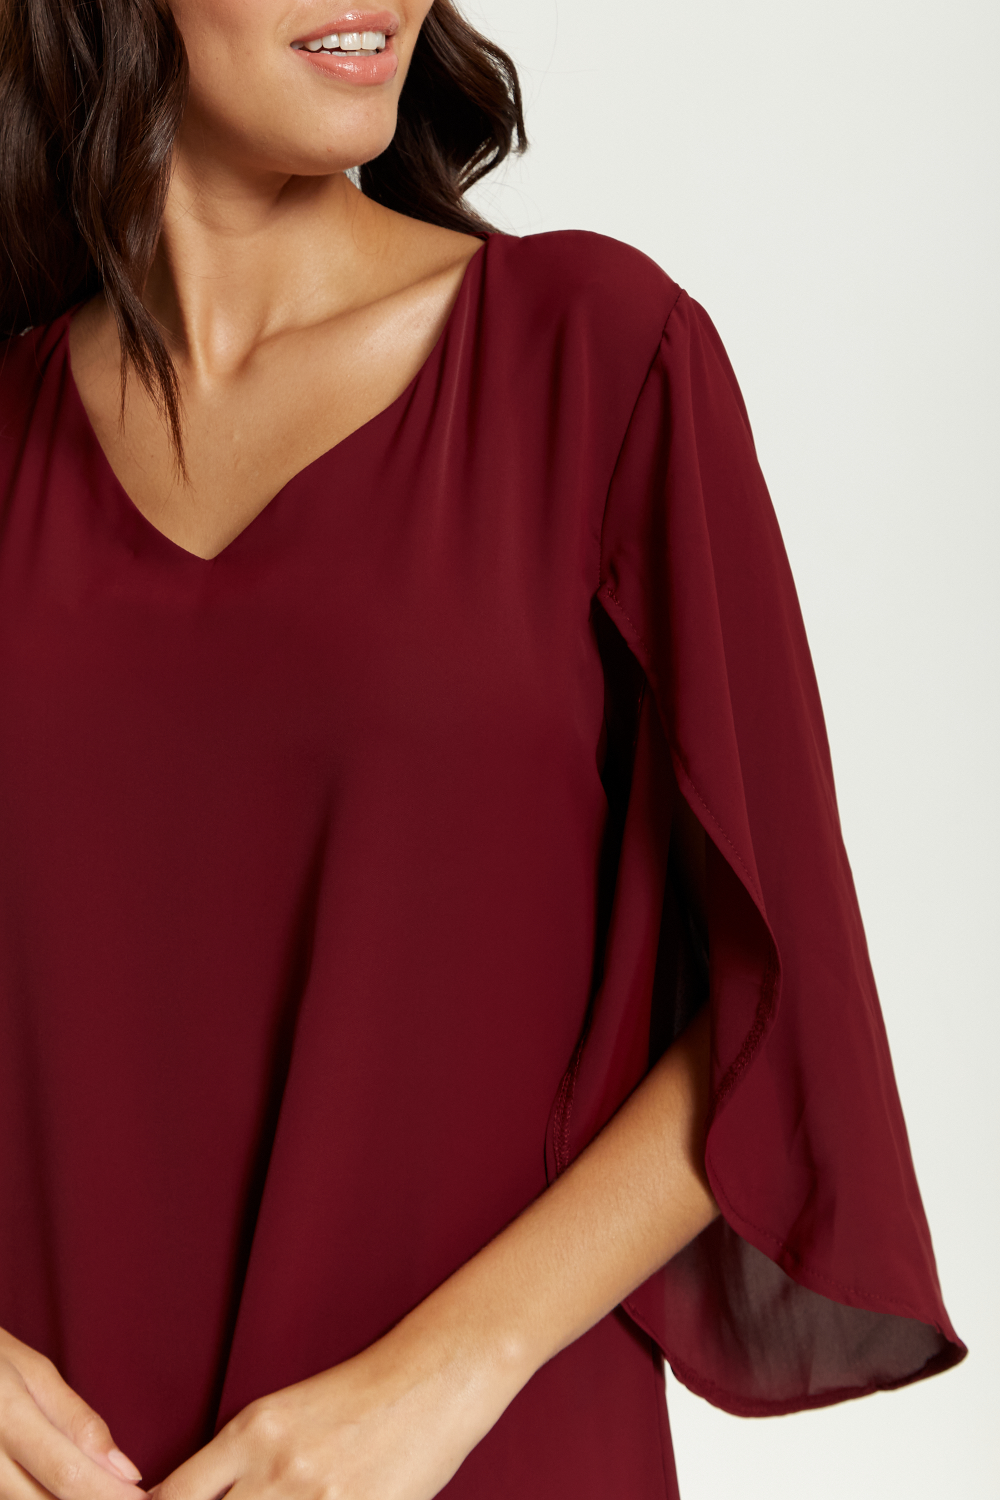 Oversized V Neck Tunic with Split Sleeves in Burgundy GLR FASHION NETWORKING